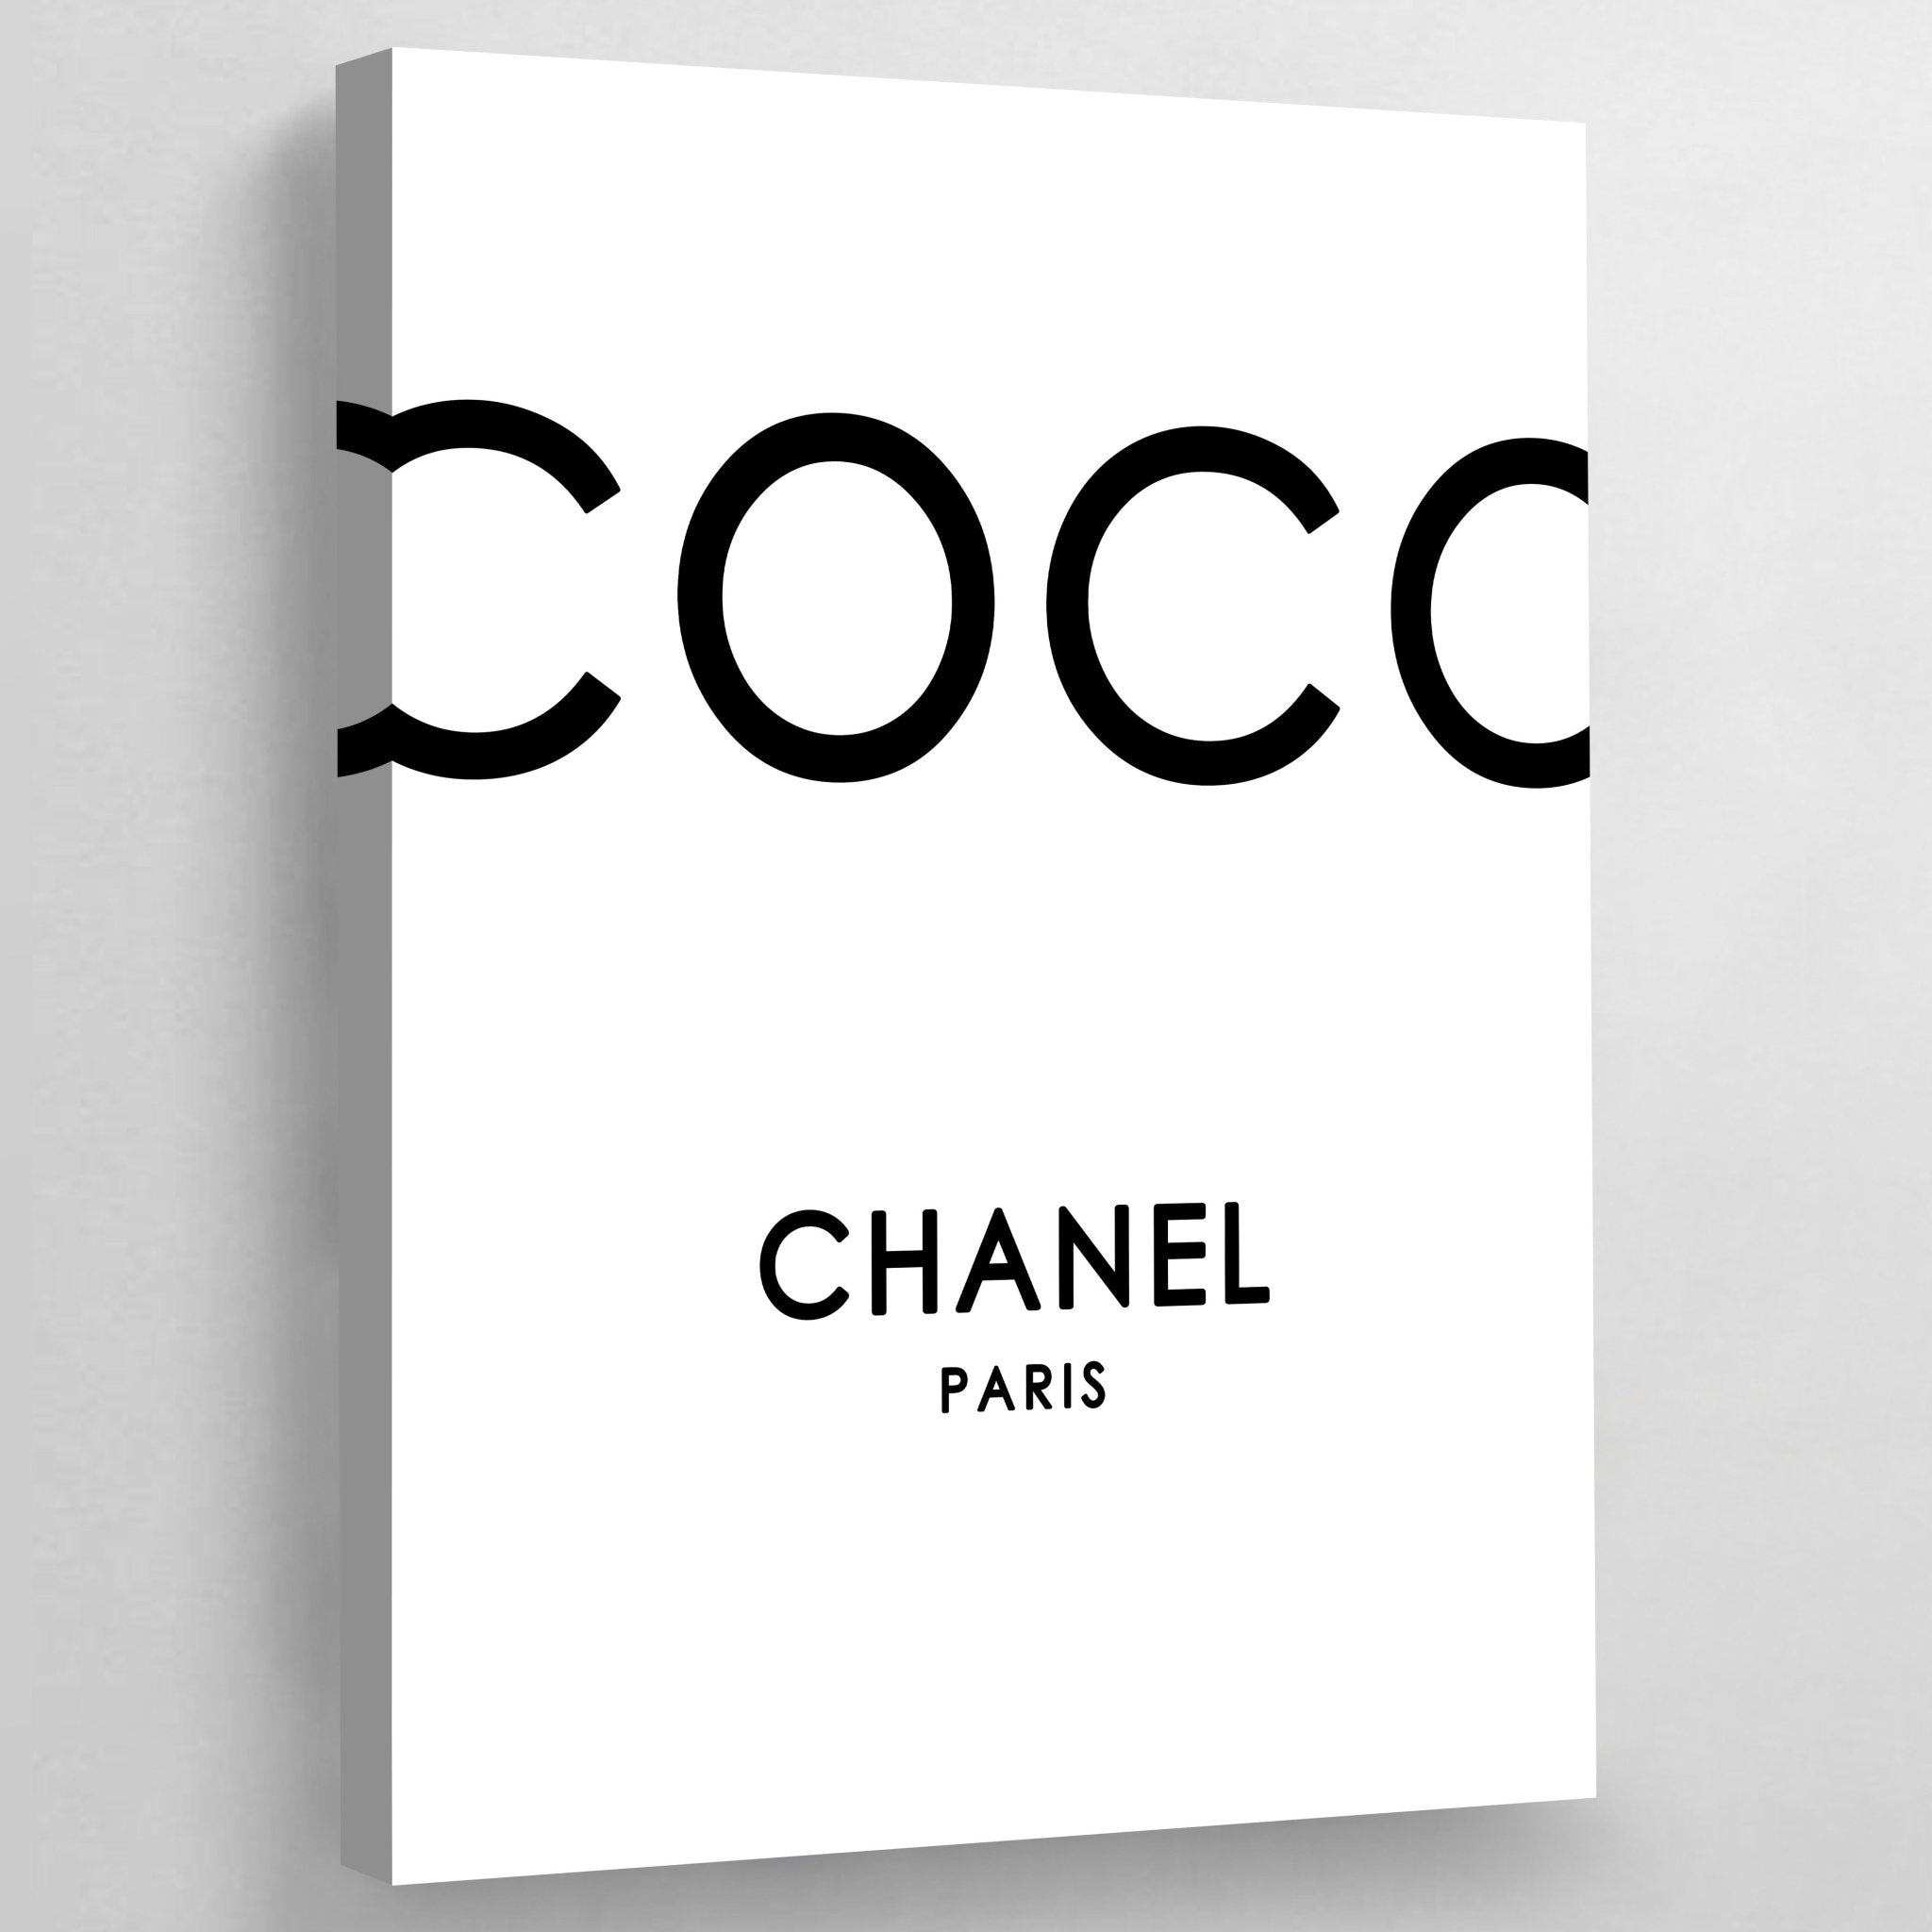 Thames  Hudson USA  Book  The World According to Coco The Wit and  Wisdom of Coco Chanel